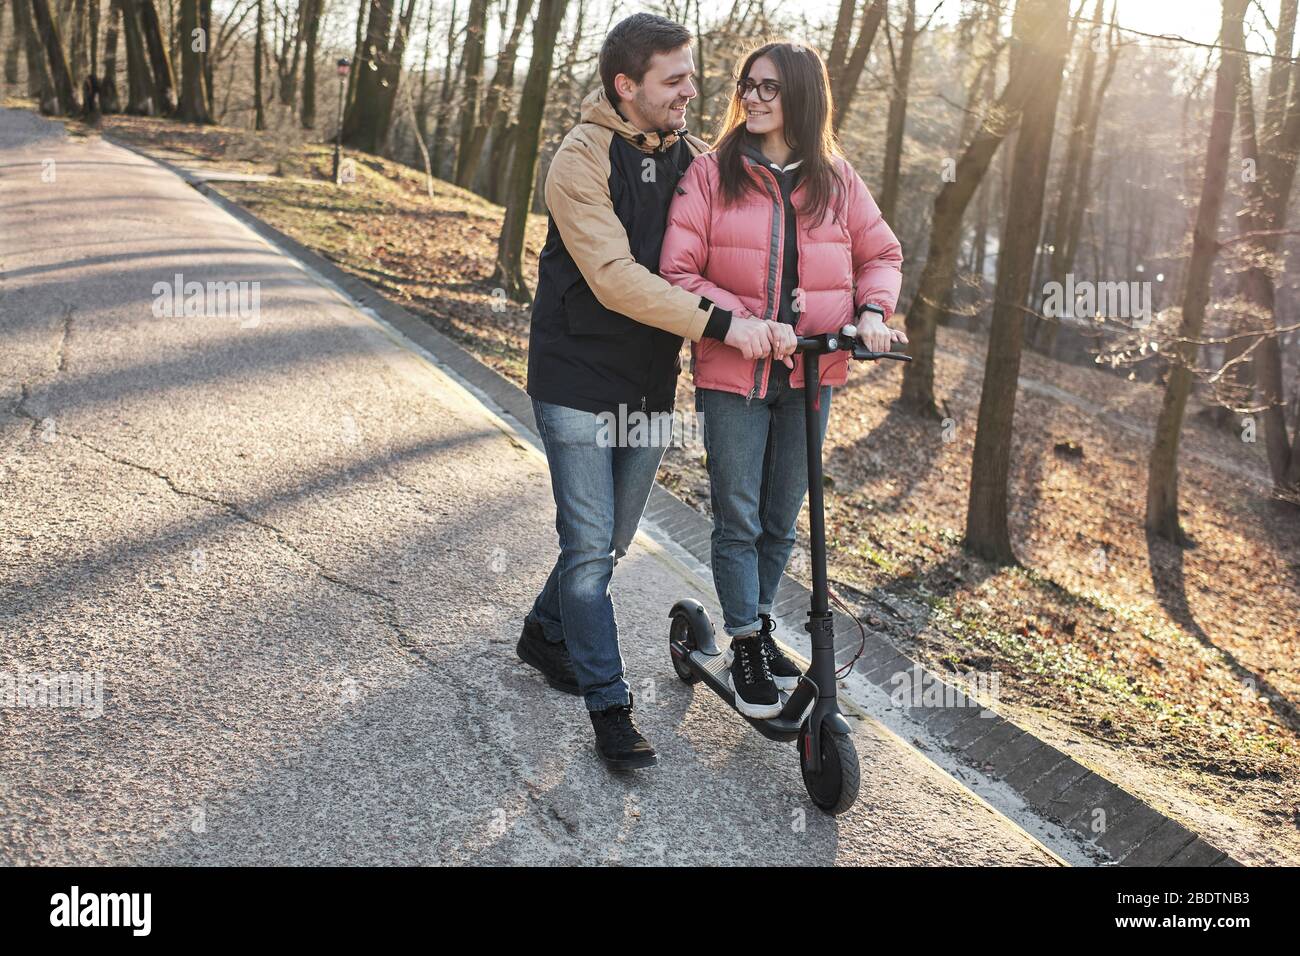 loving young millennials having fun walking on an electric scooter Stock Photo